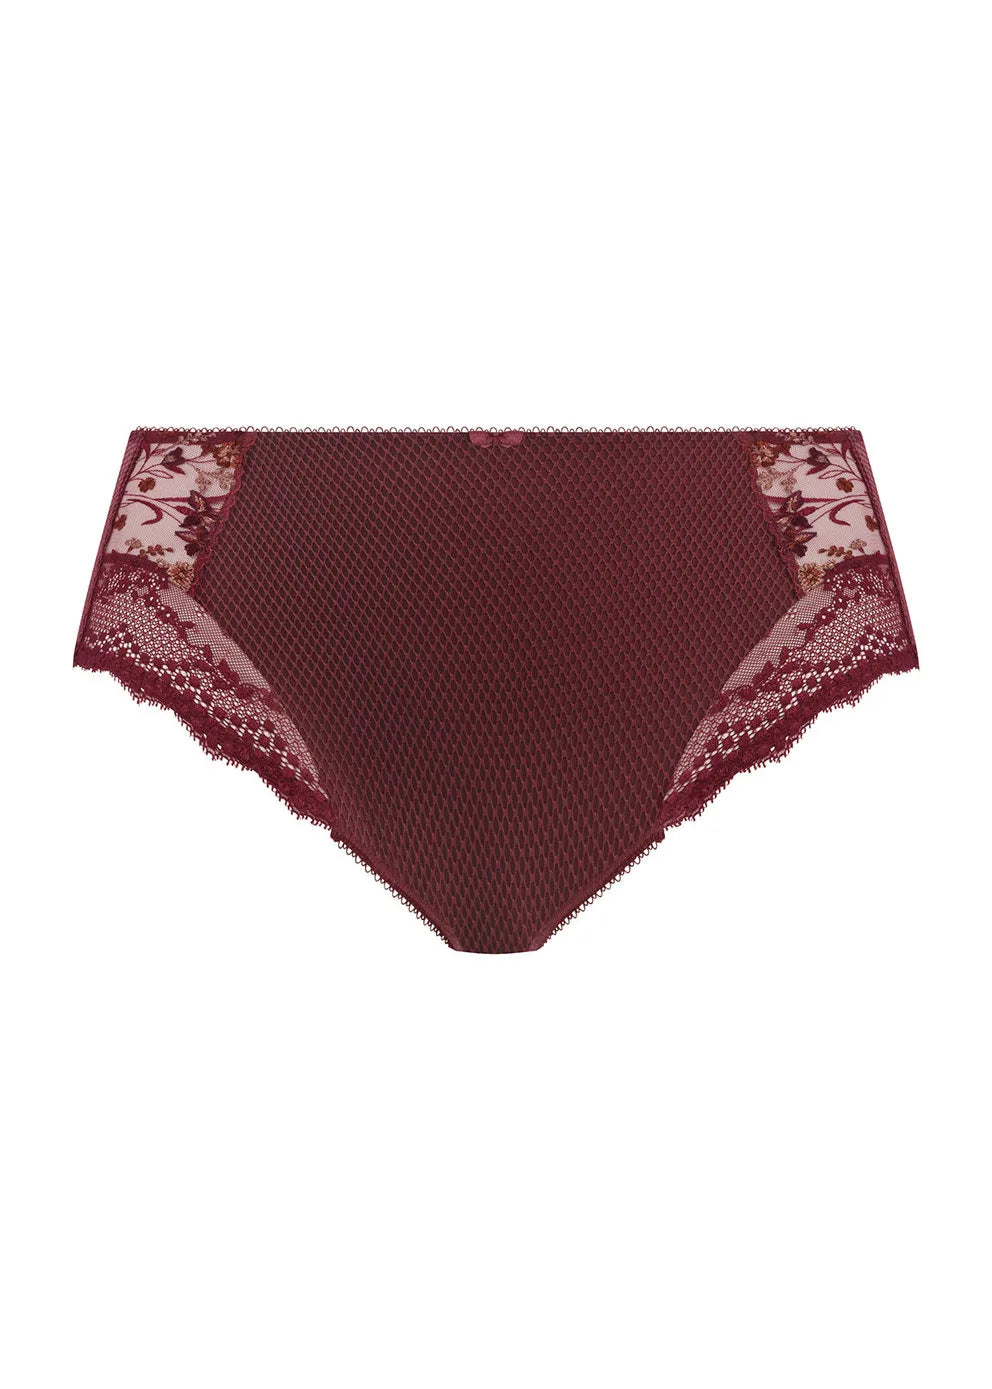 CHARLEY Full Brief from Elomi at Belle Lacet Lingerie.